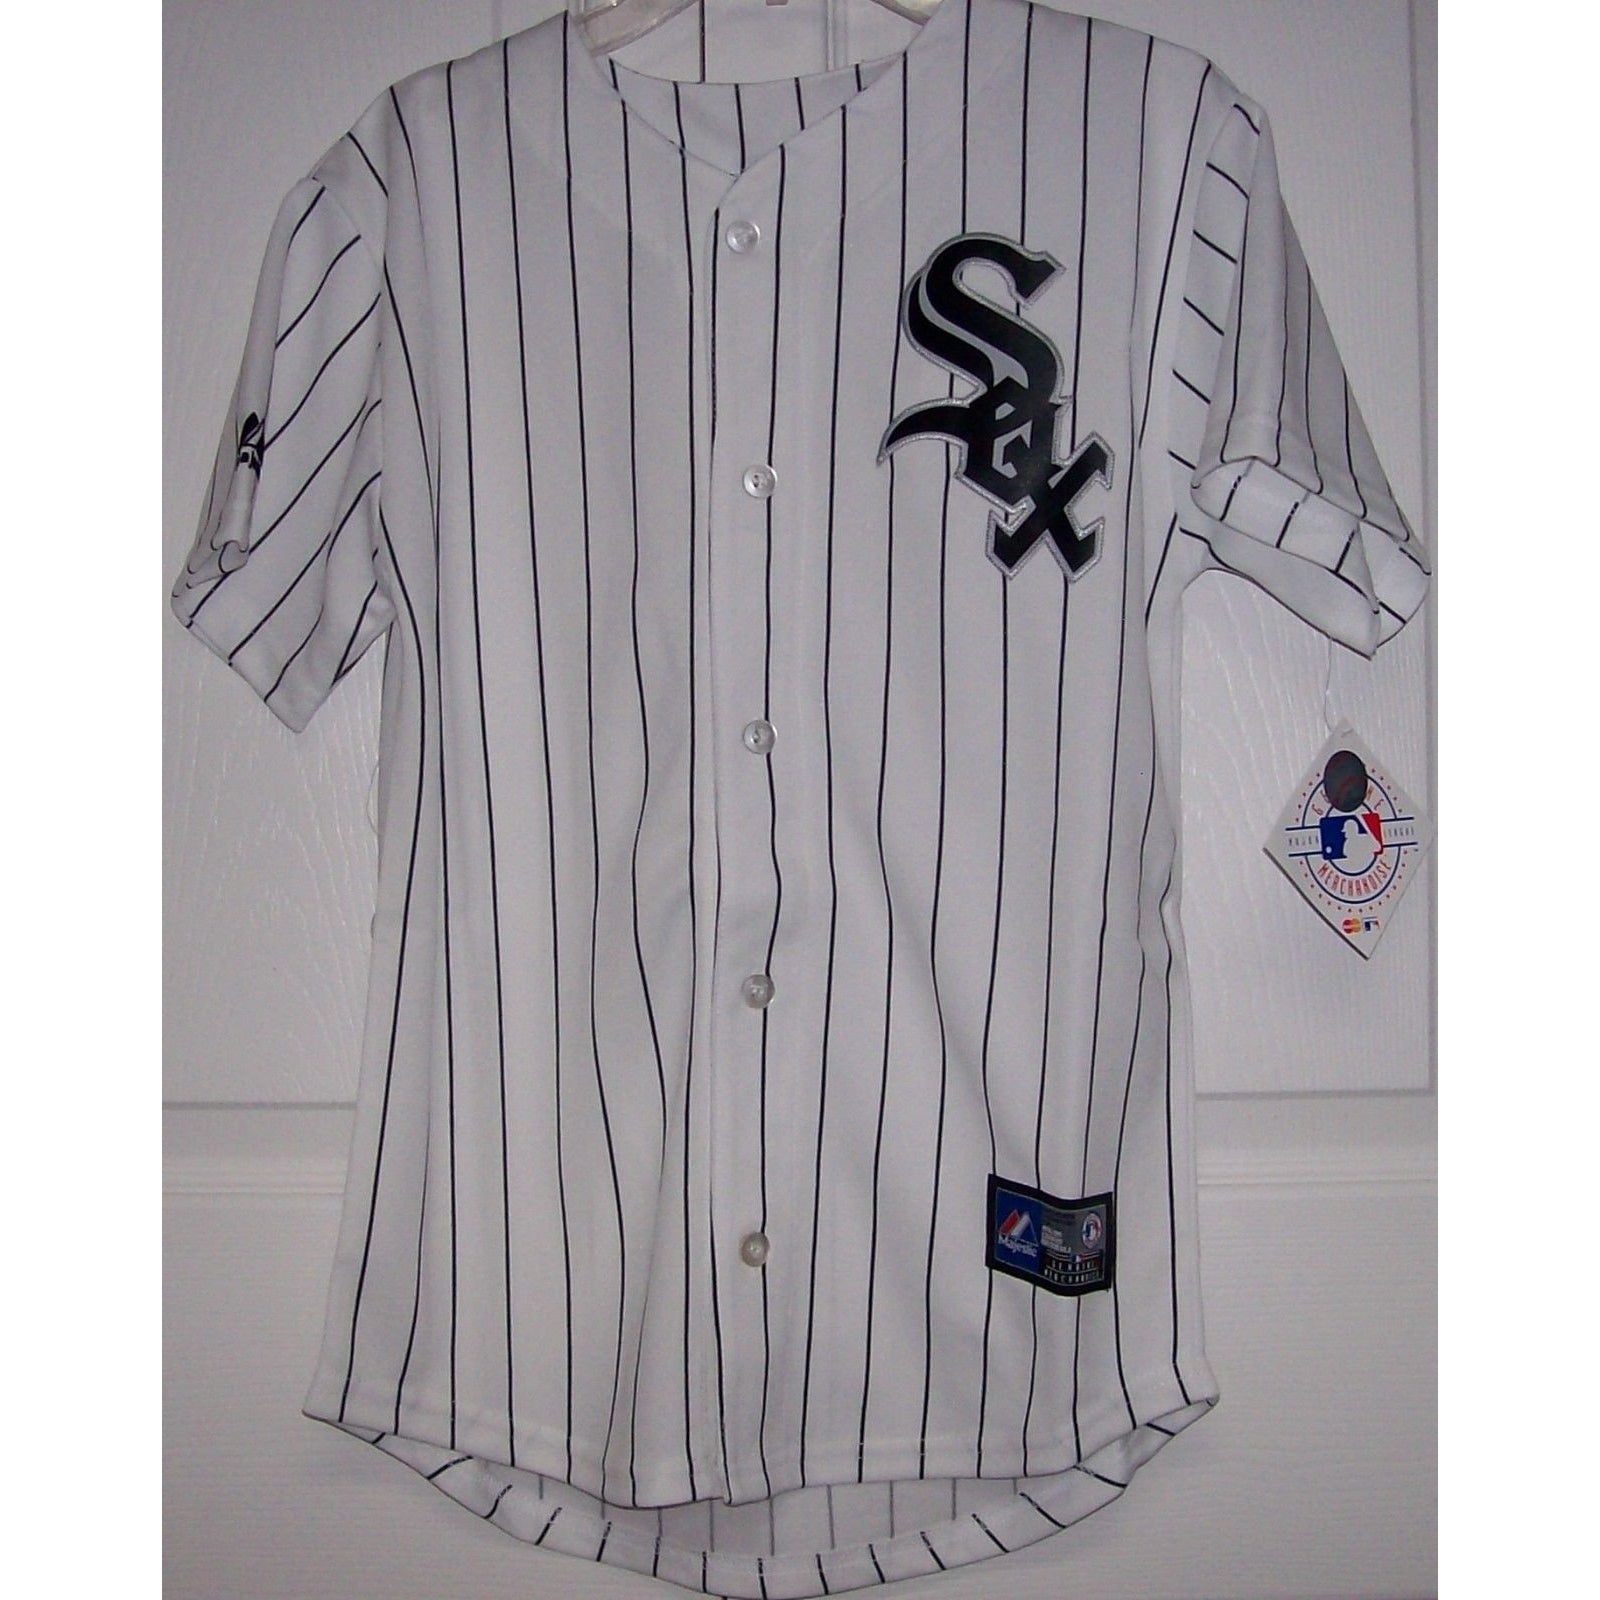 white sox jersey new